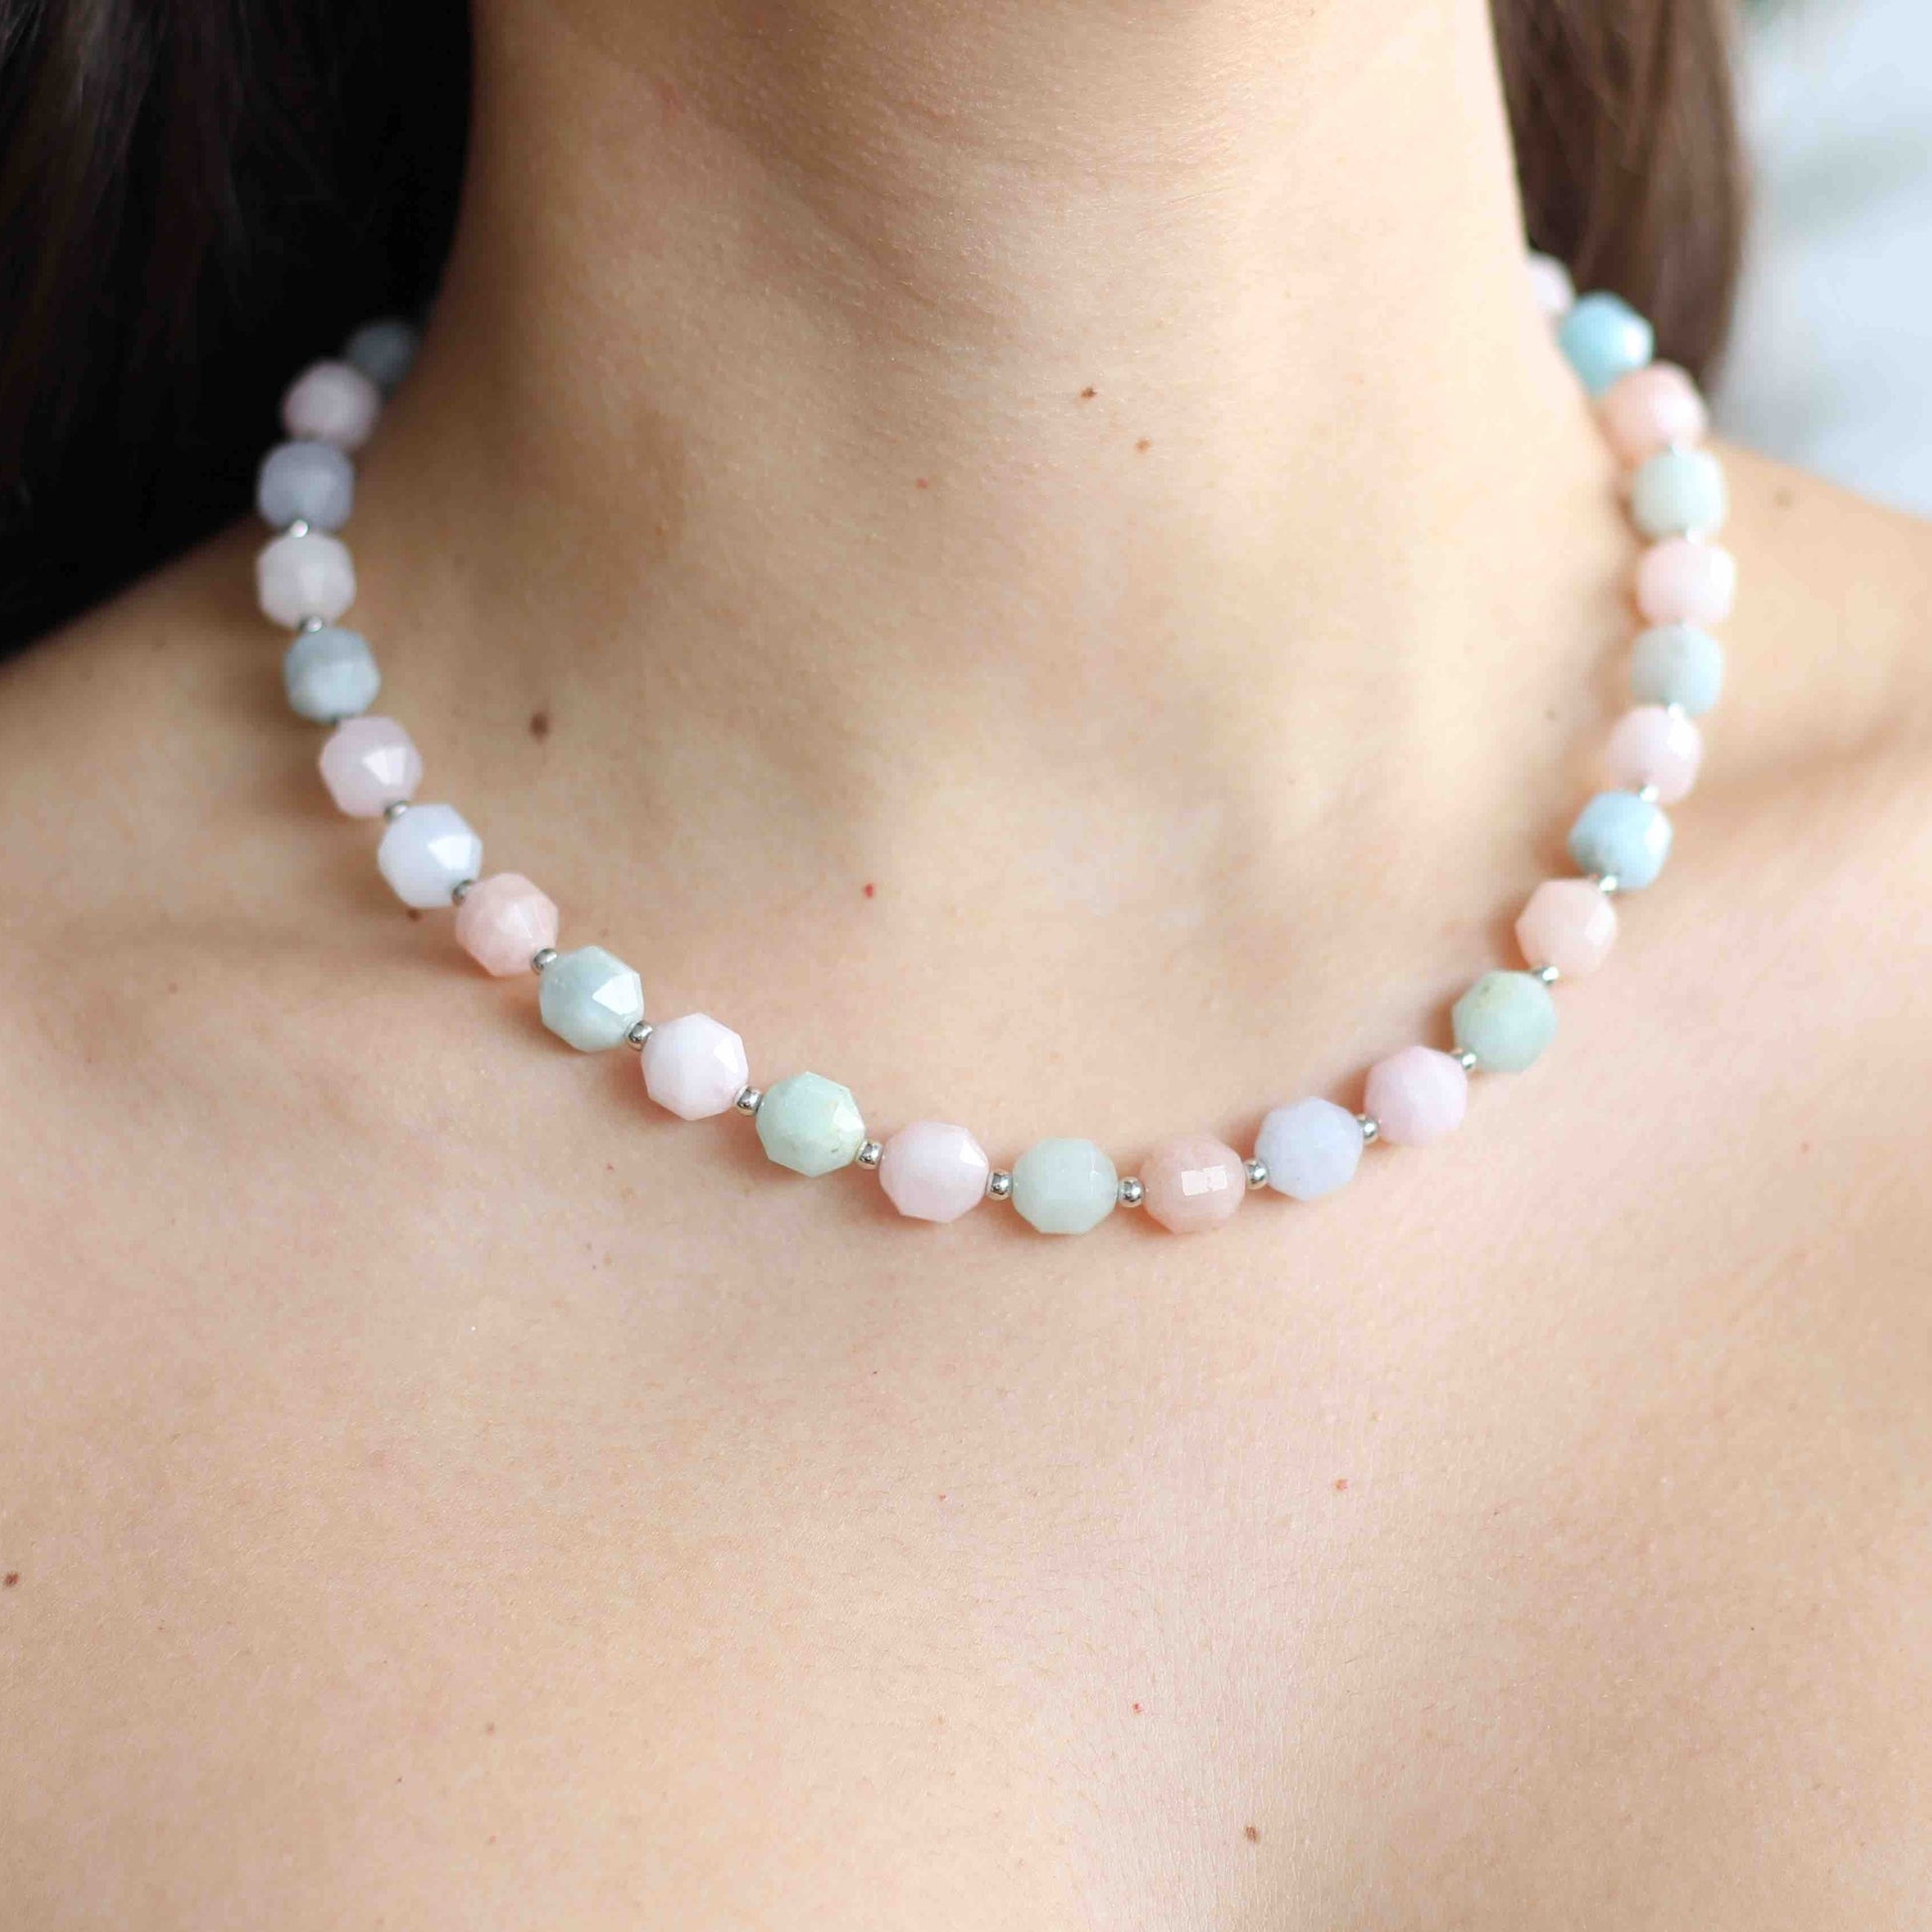 Morganite Beaded Necklace with 925 Sterling Silver Beads